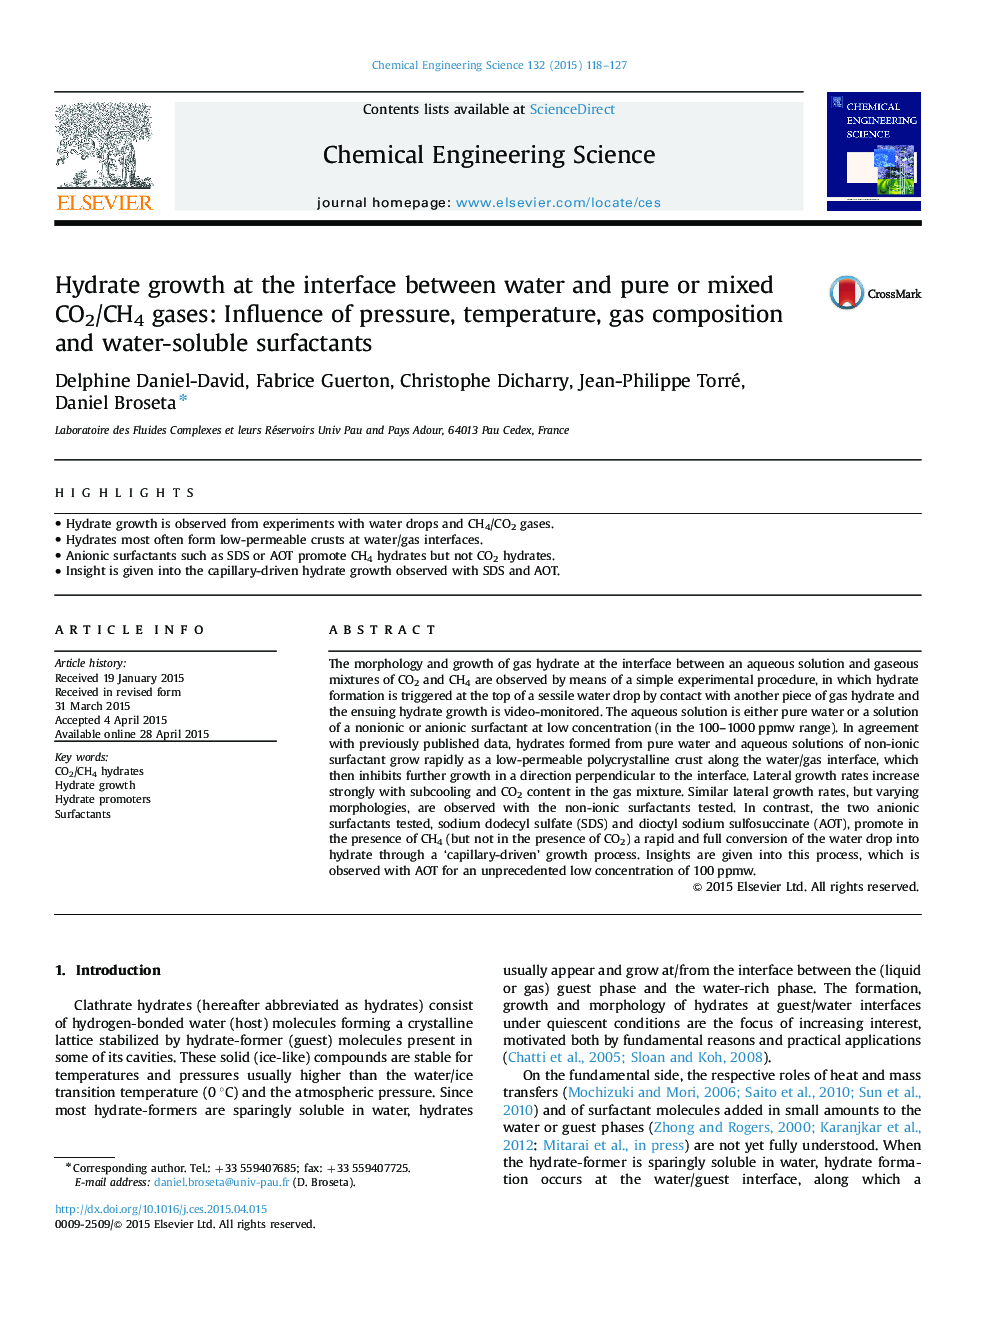 Hydrate growth at the interface between water and pure or mixed CO2/CH4 gases: Influence of pressure, temperature, gas composition and water-soluble surfactants